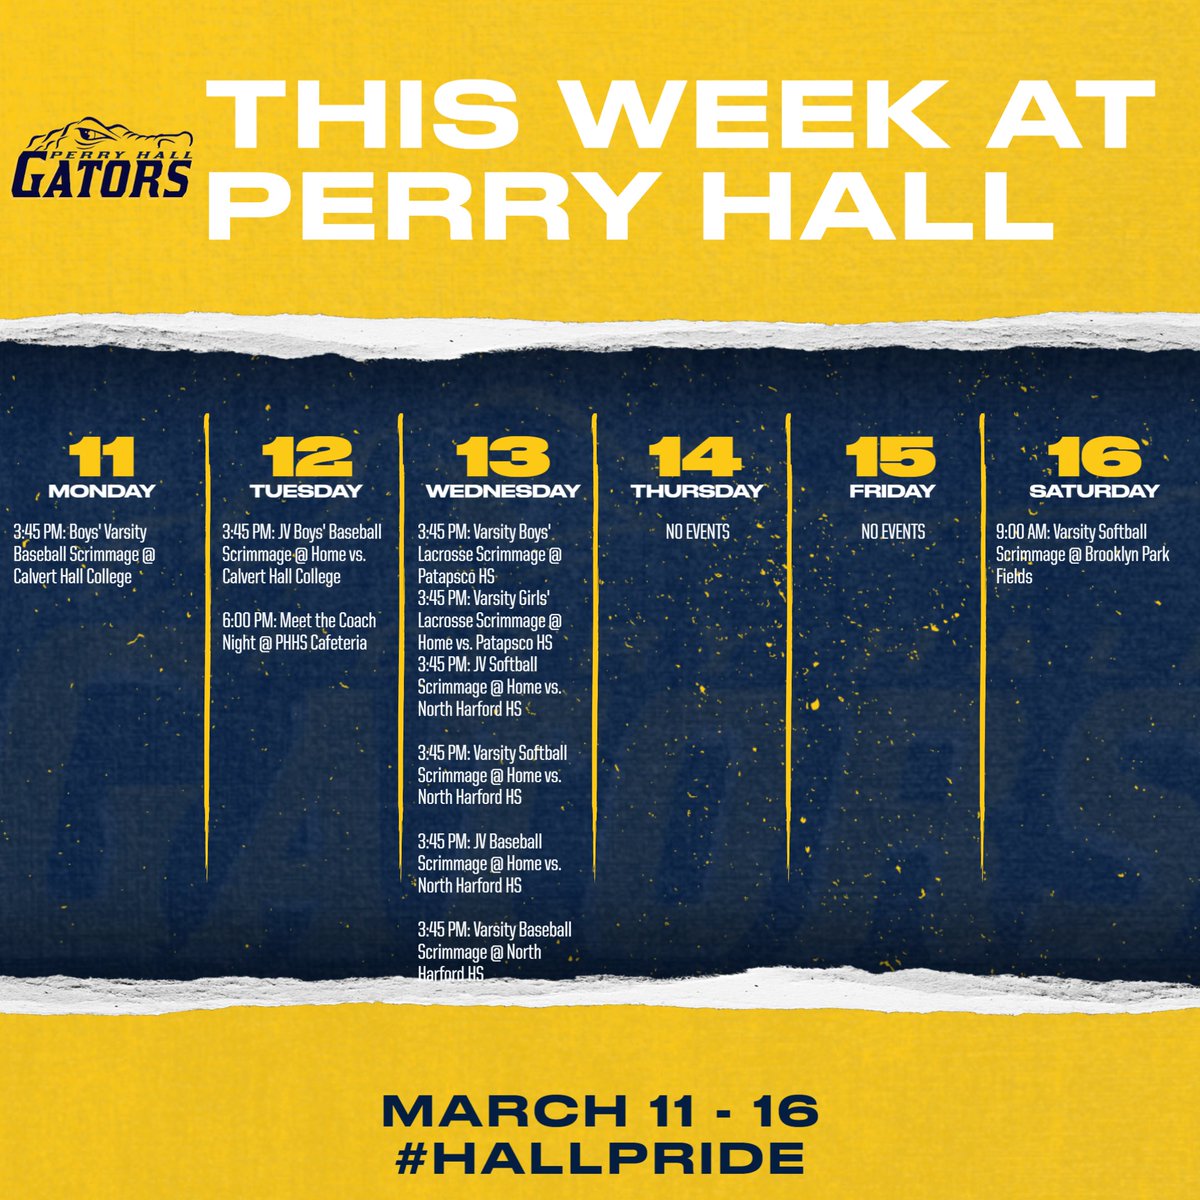 Update! Gators: Mark your calendars for all of this week's events! #hallpride